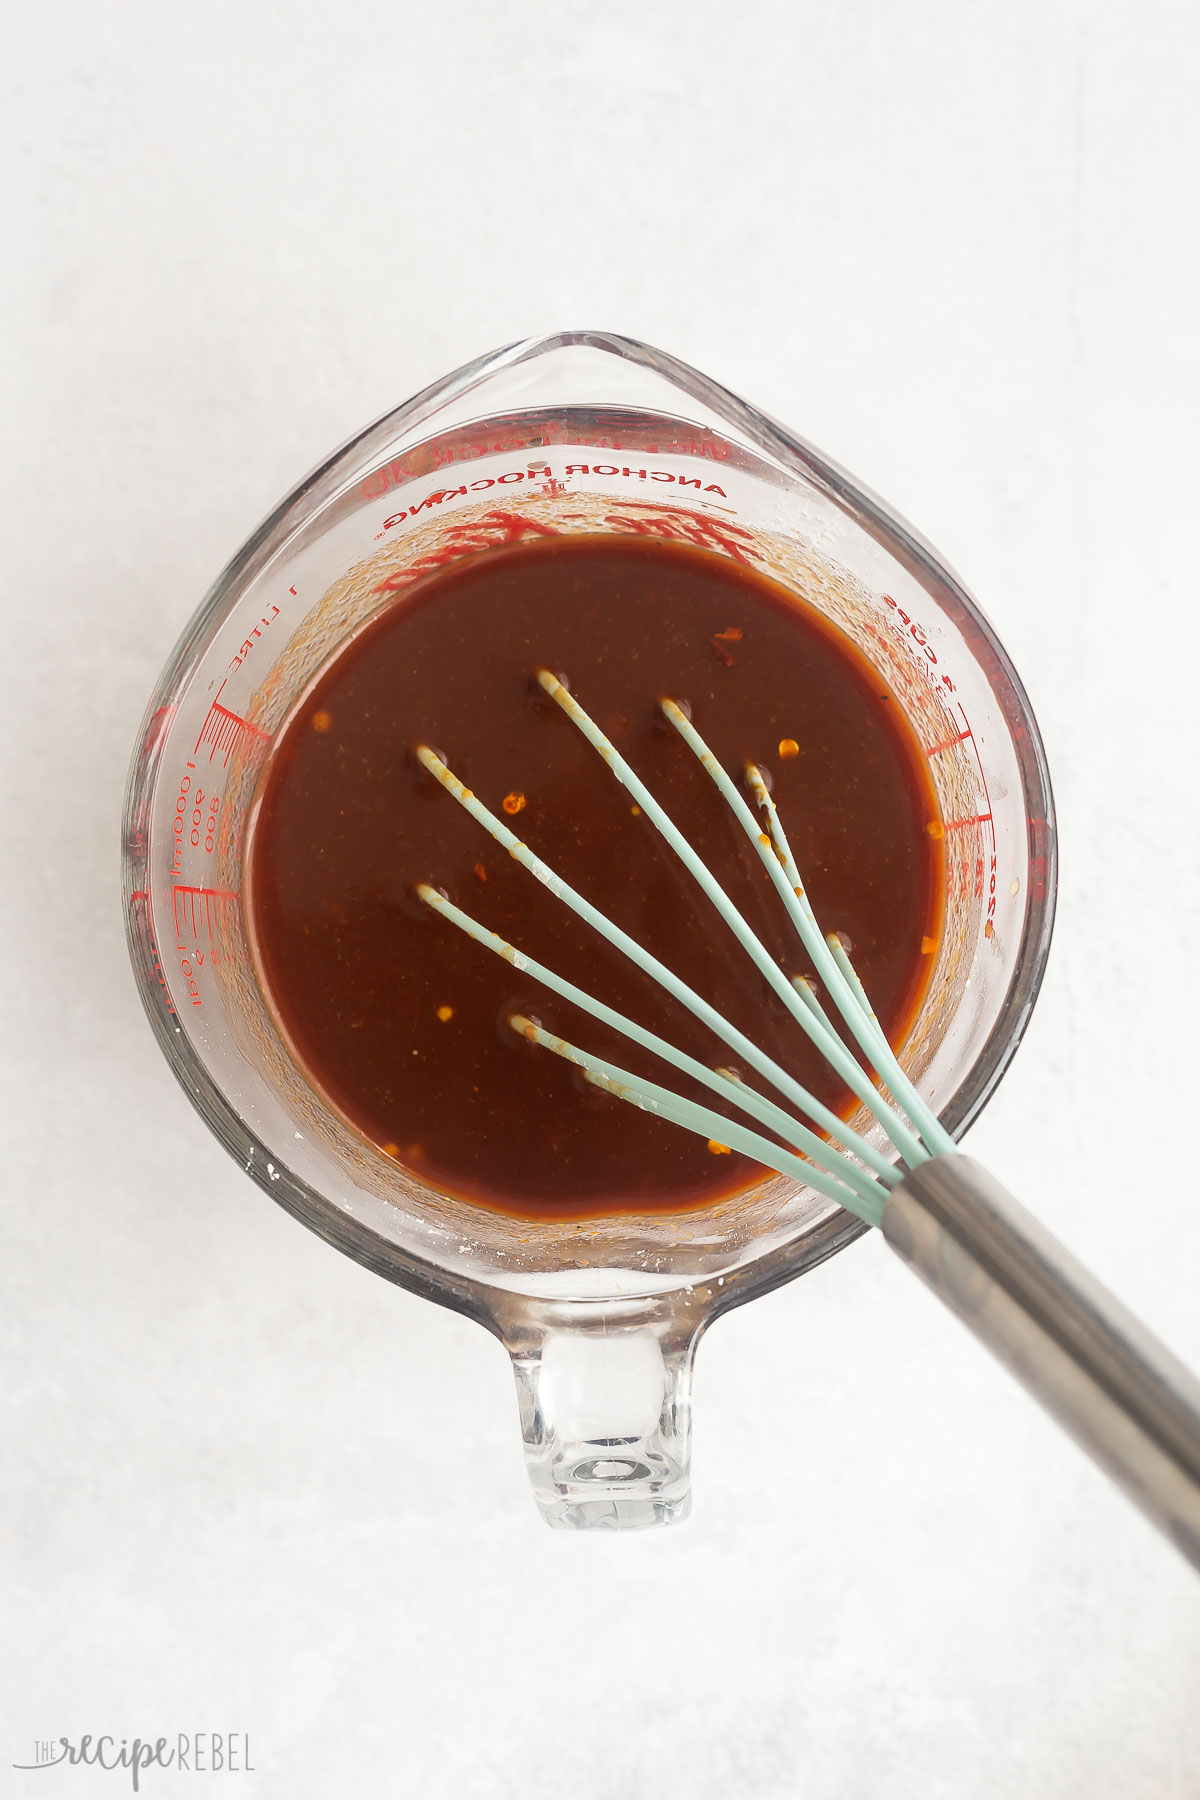 sauce for baked beans stirred together in glass measuring cup.